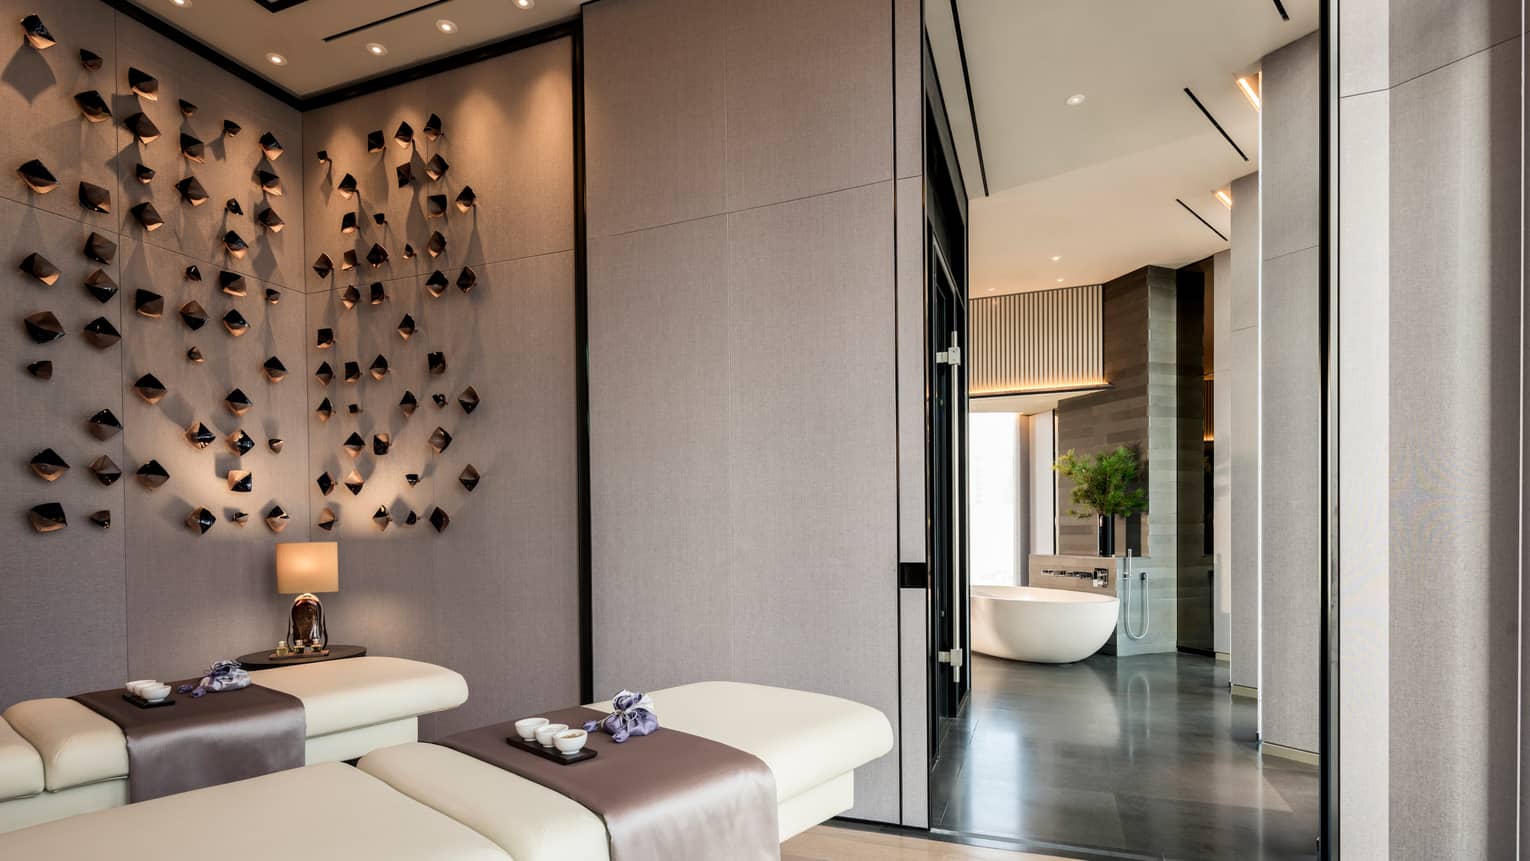 Couples massage beds under modern wall sculptures by hall leading to spa tub